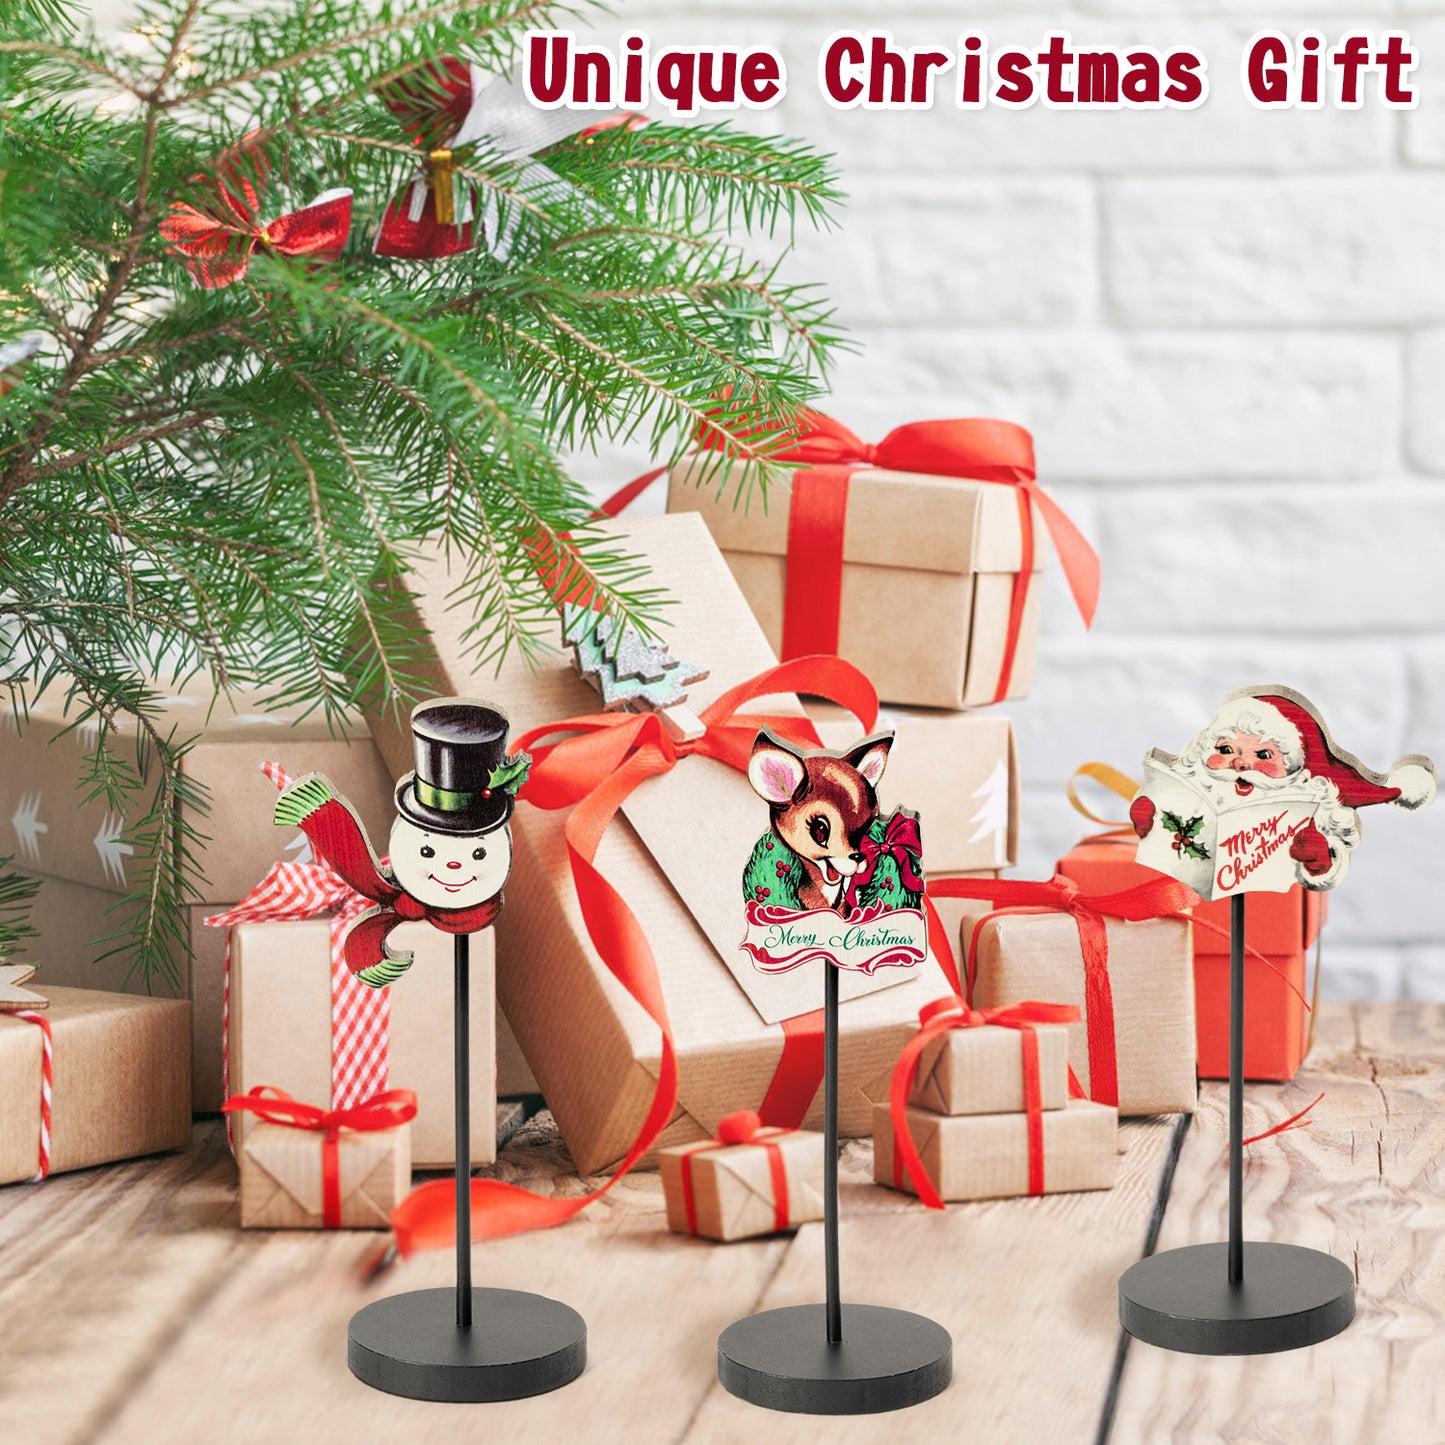 3Pcs Vintage Christmas Wood Tall Standing Block Set, Christmas Party Decoration Snowman Santa Elk Table Decorations, Wooden Tabletop Signs for Home Decor Supplies, Holiday Gifts for Kids